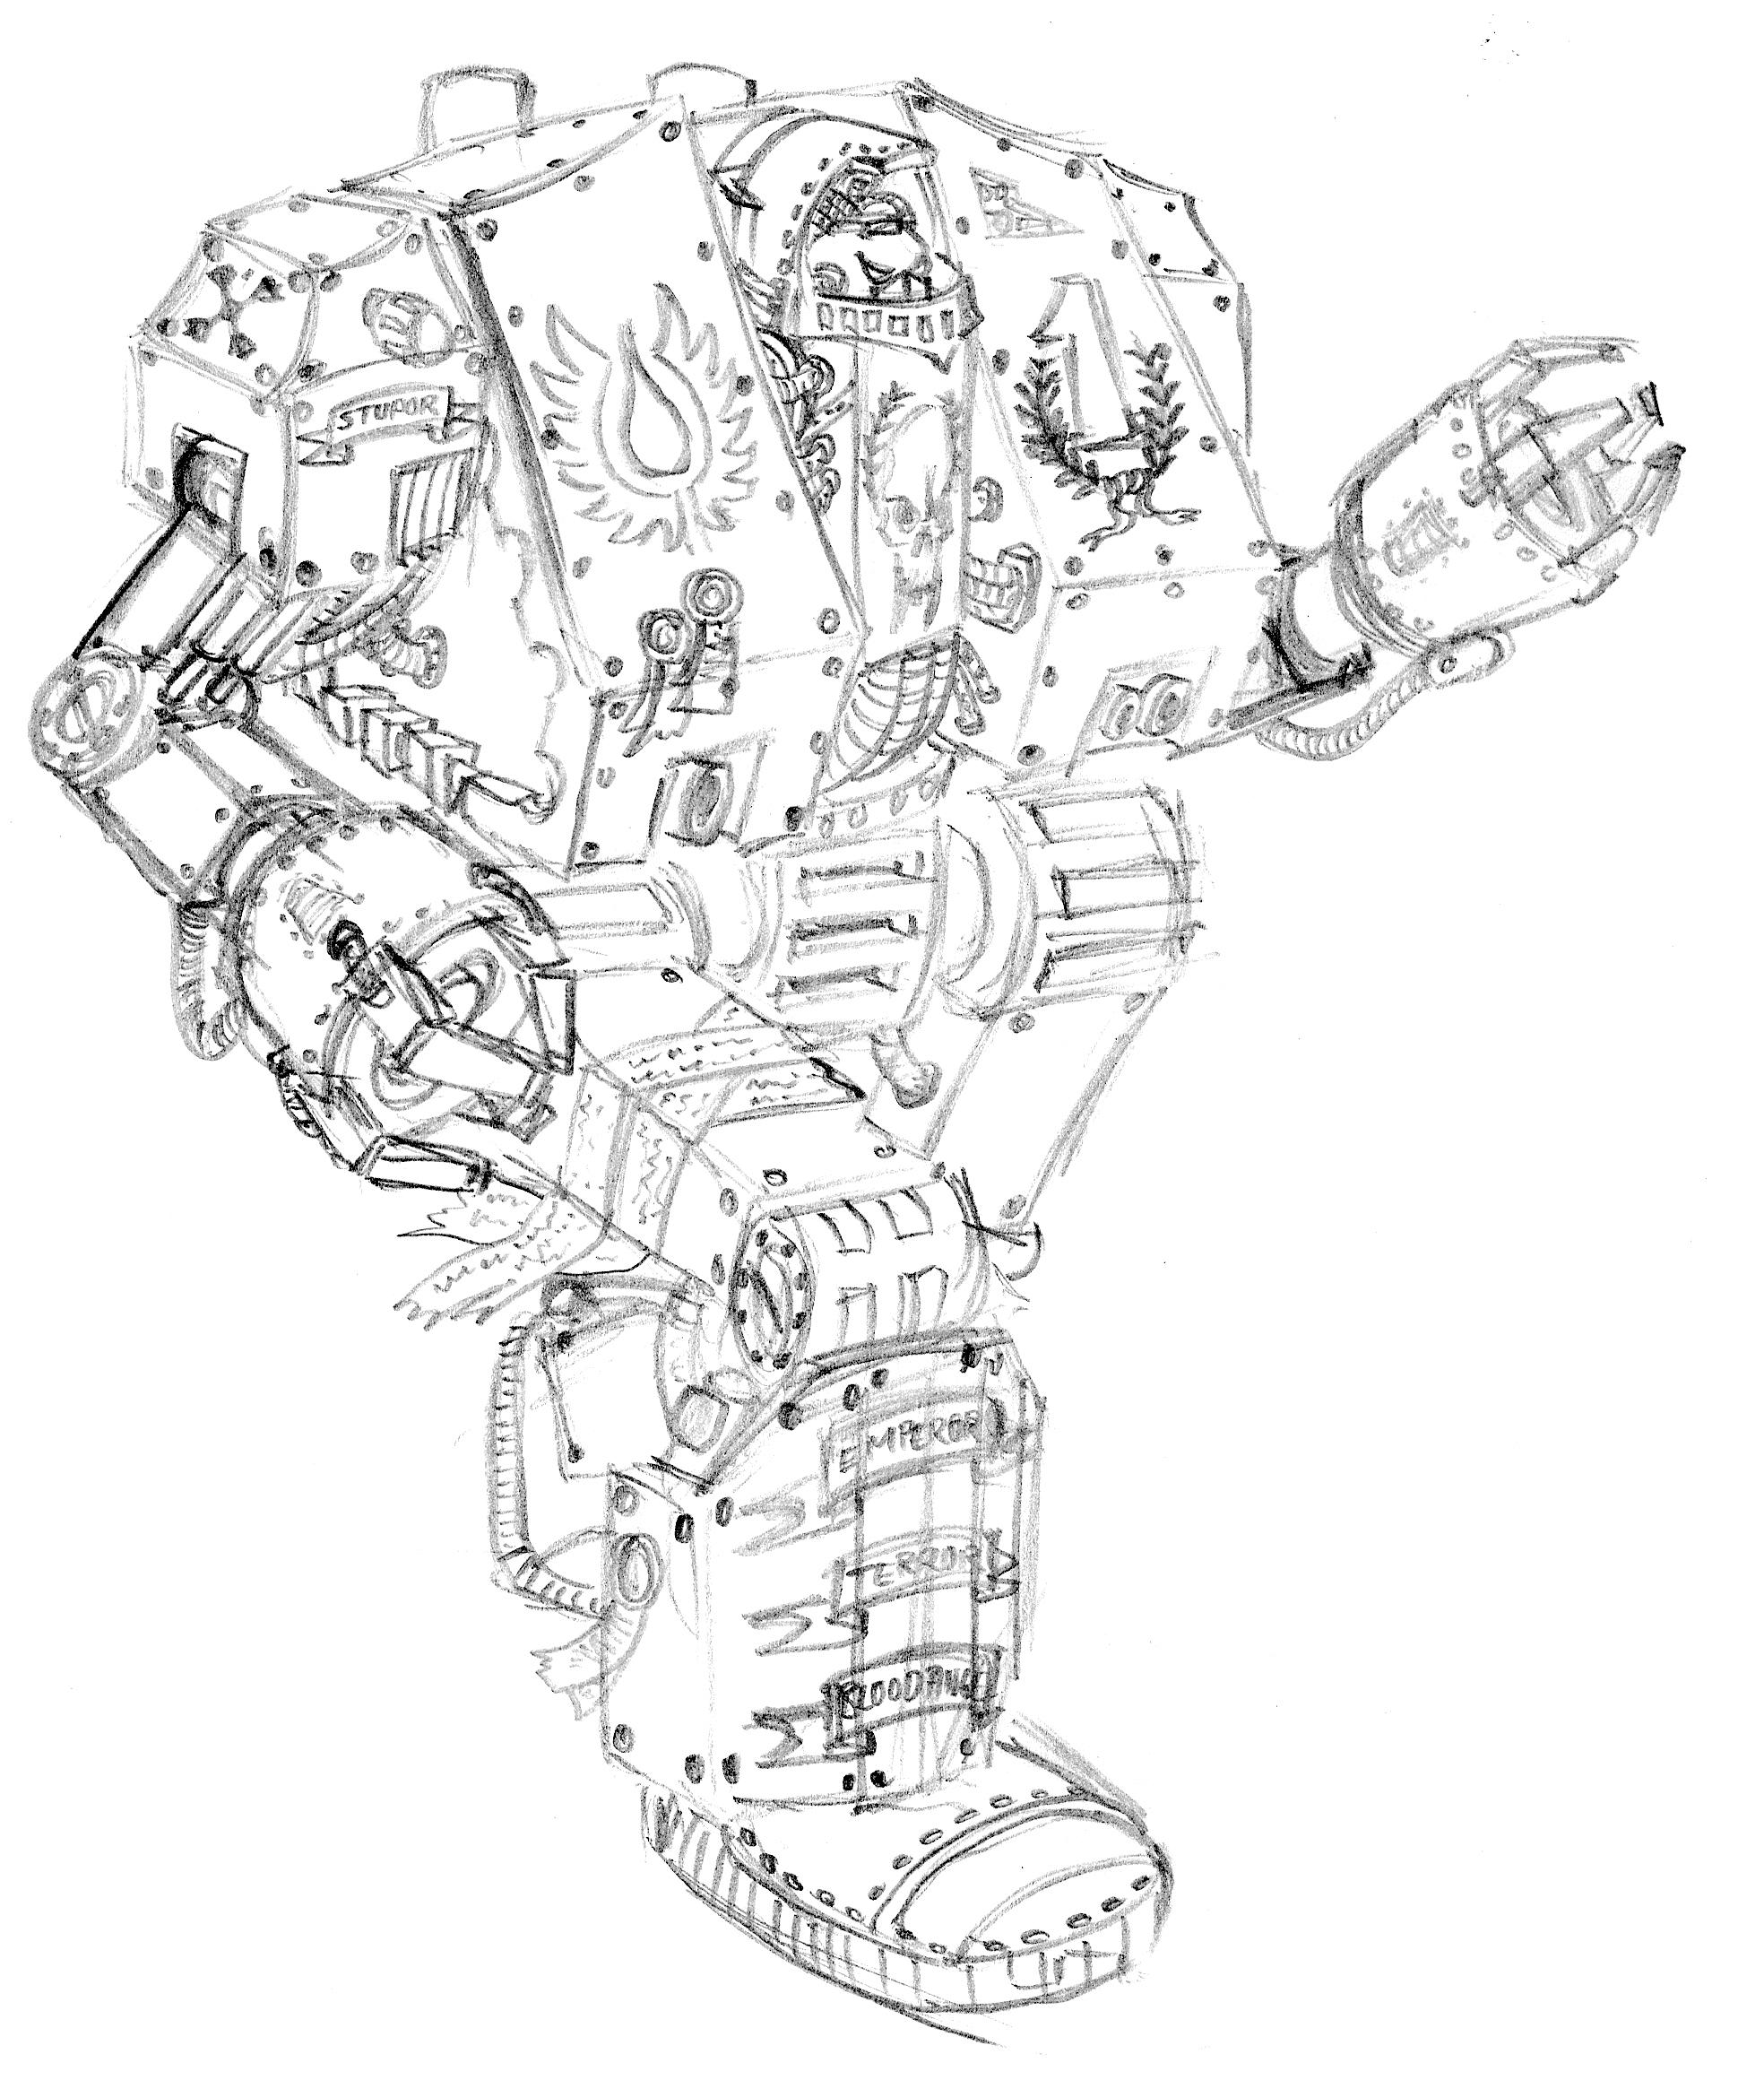 80´s, Artwork, Chaos, Chaos Space Marines, Conversion, Daemons, Drawing, Drawings, First Edition, Old Style, Space Marines